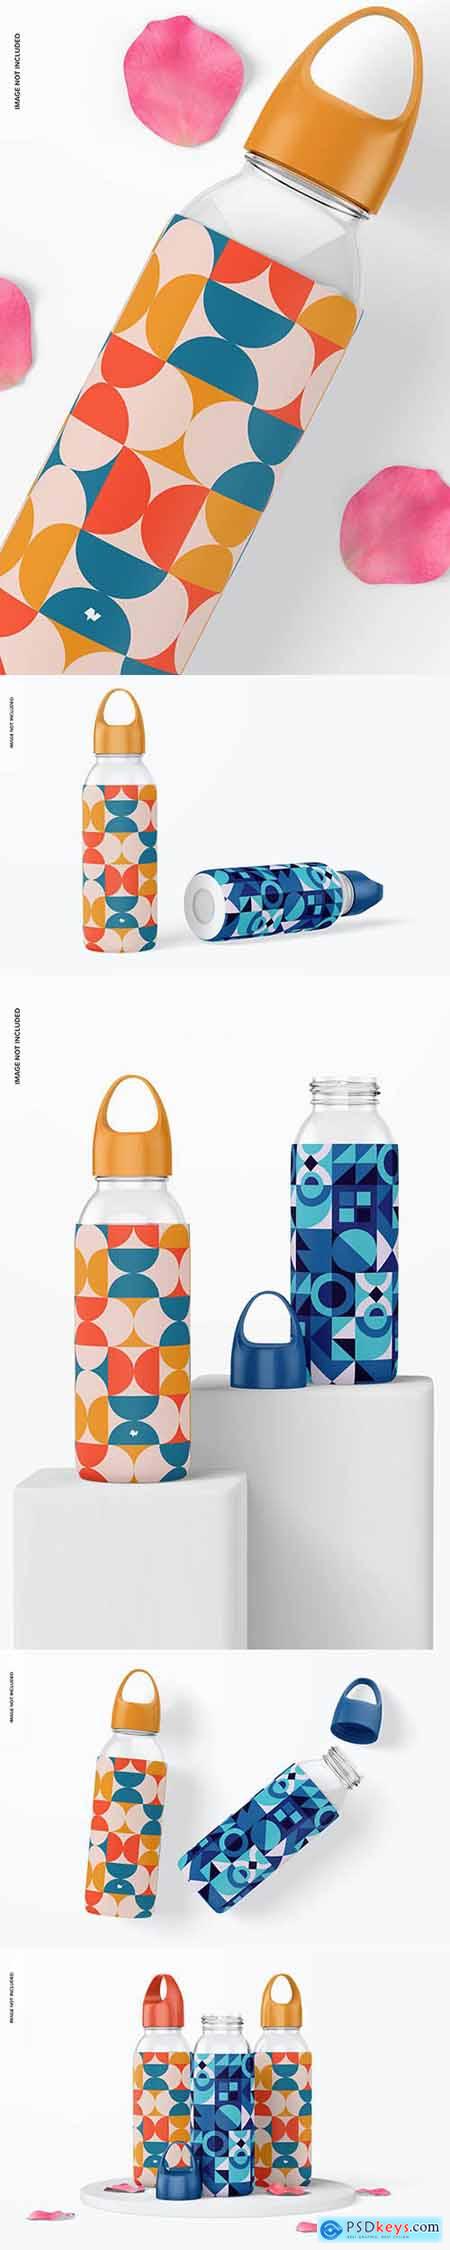 Water bottles with silicone sleeve set mockup